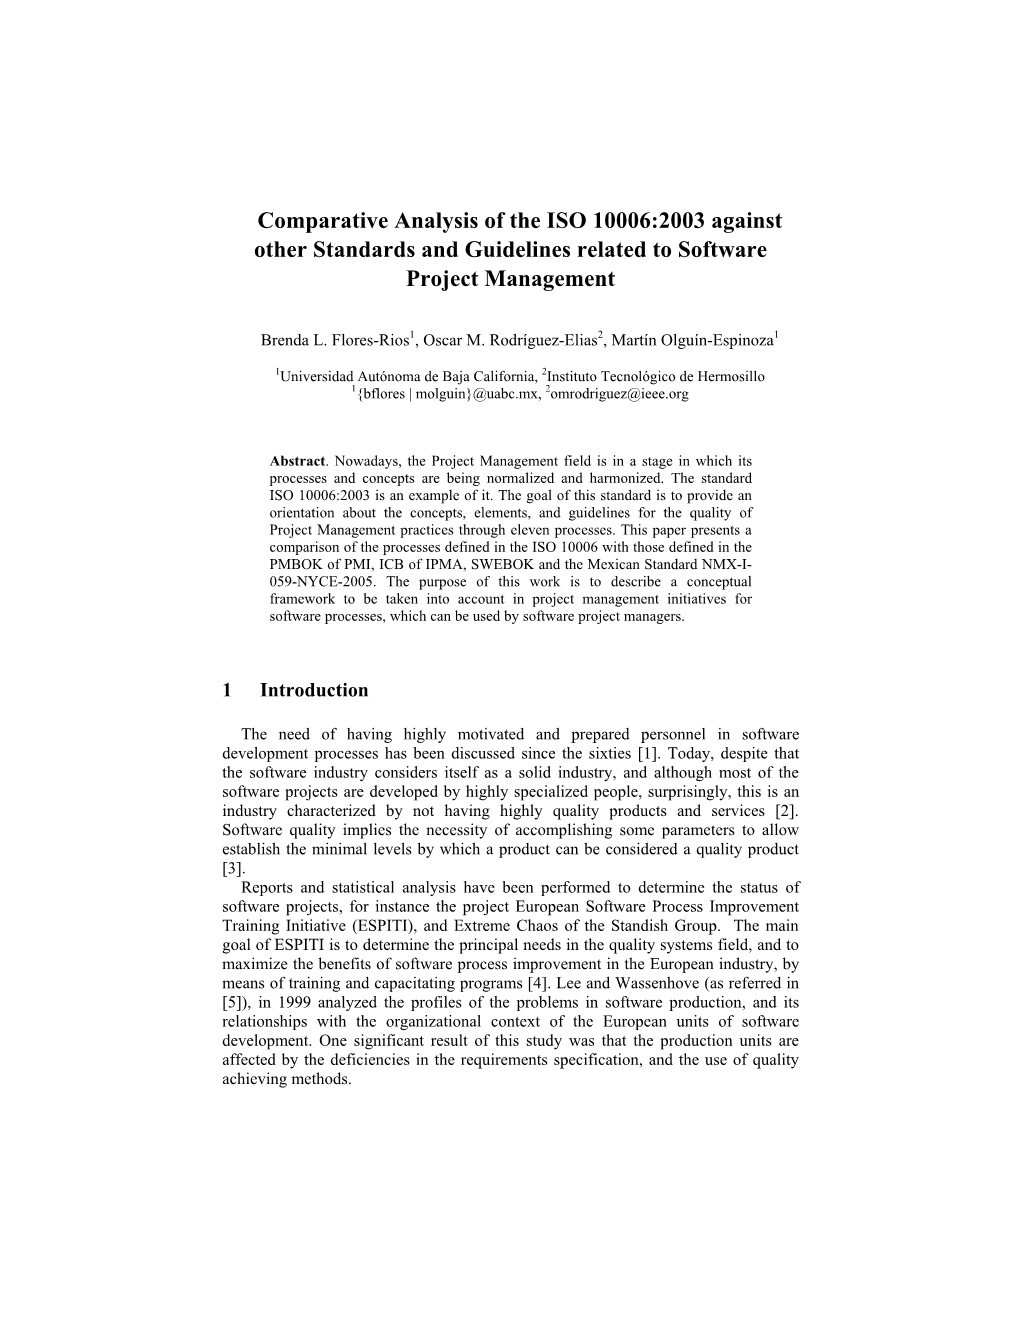 Comparative Analysis of the ISO 10006:2003 Against Other Standards and Guidelines Related to Software Project Management